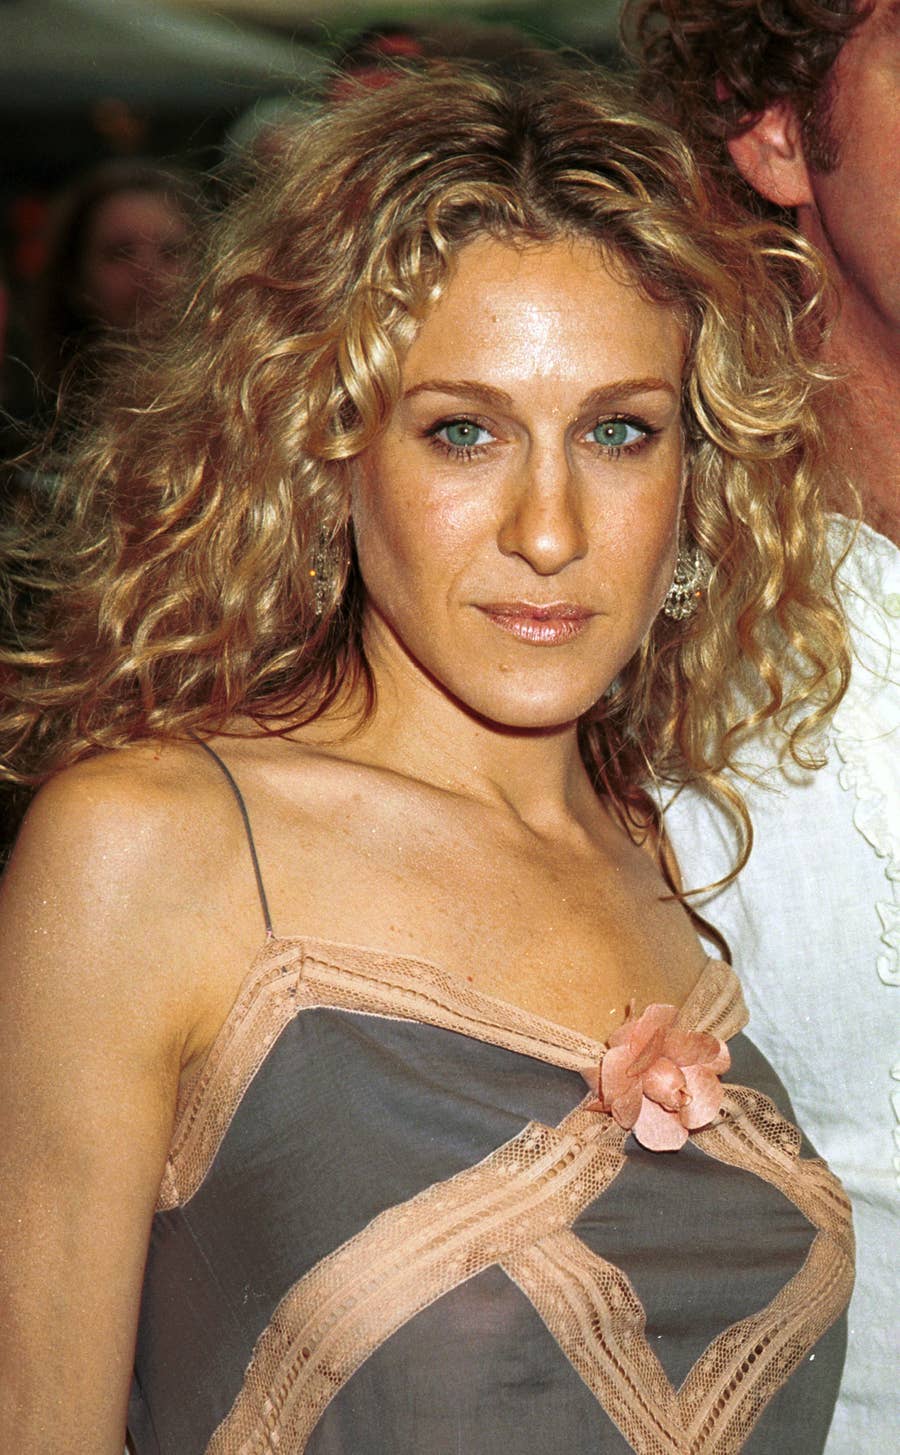 Sarah Jessica Parker Look Alike Porn - Here's What Your Early 2000s Actress Faves Are Doing Now